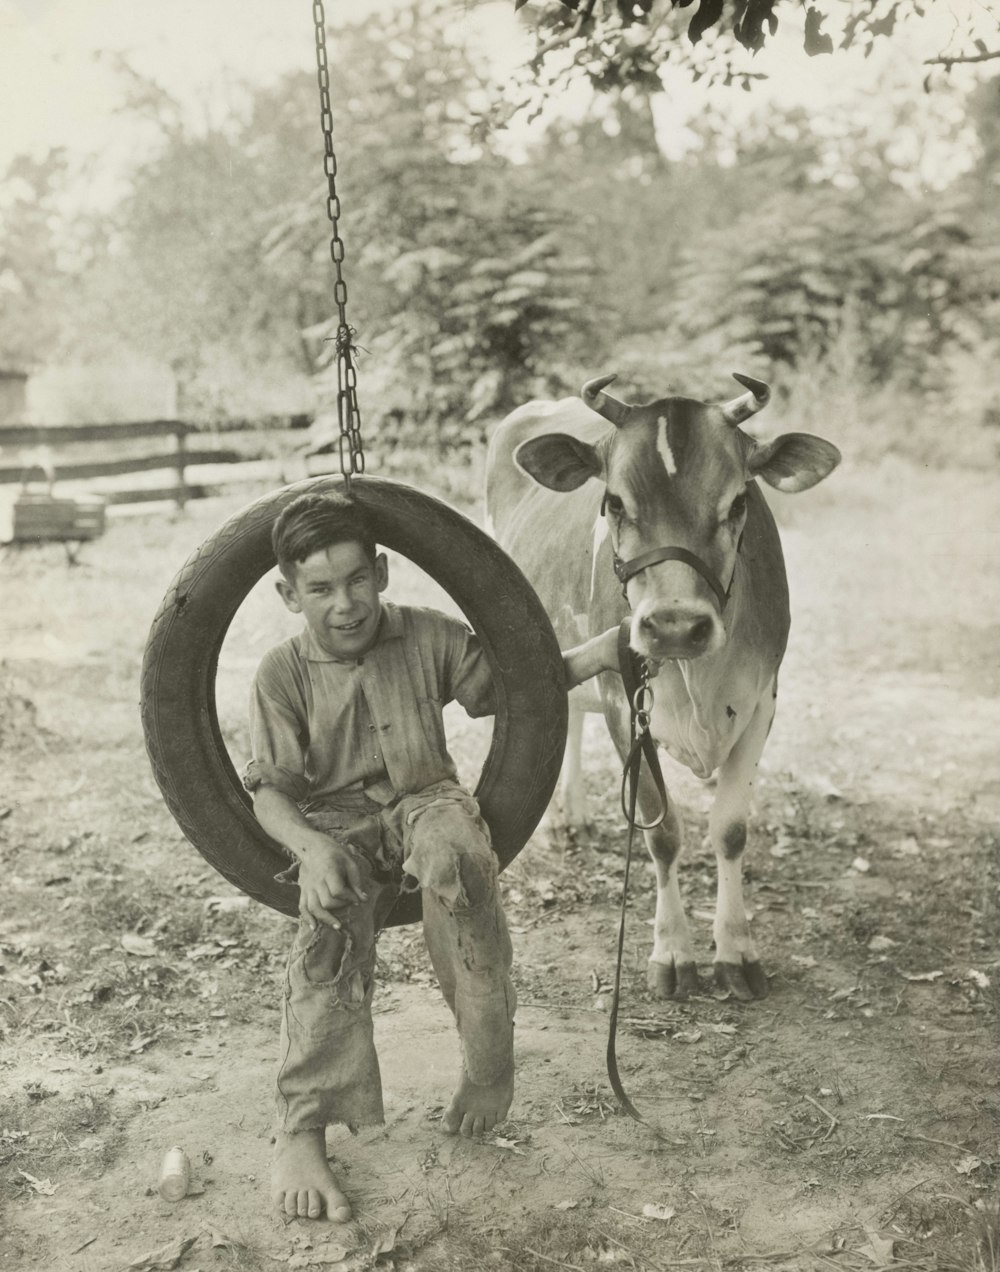 Boy in tire swing holds a cow by its halter